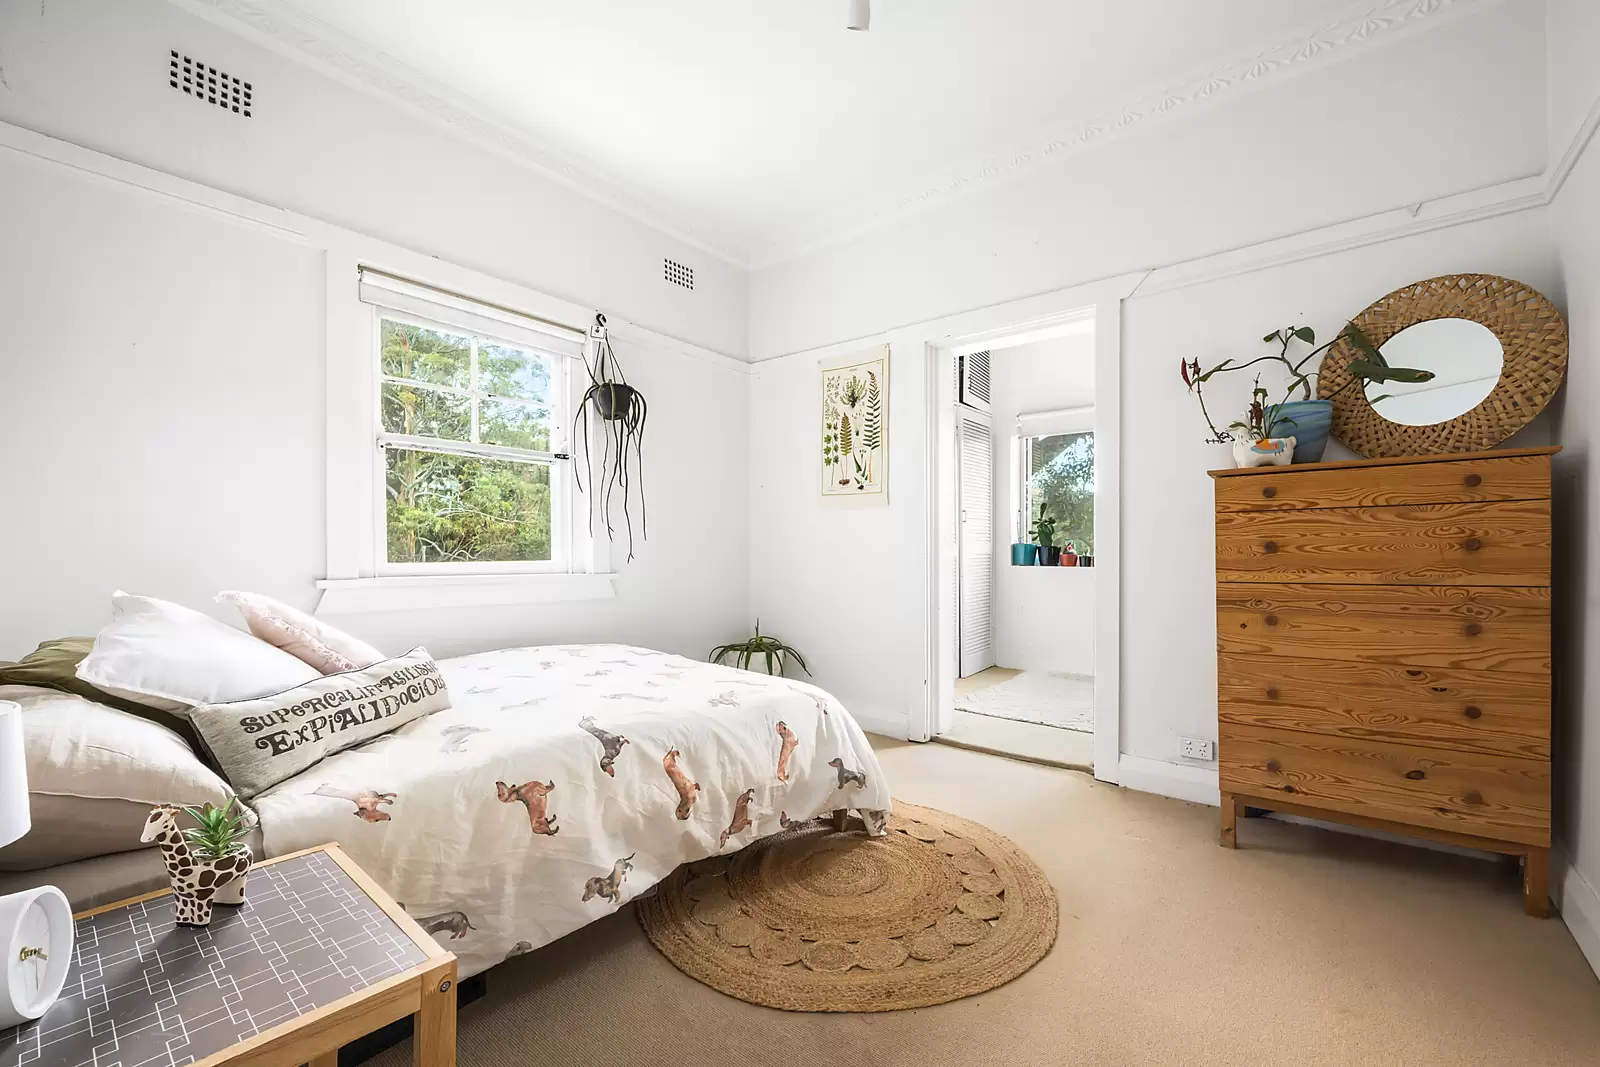 Photo #6: 3/129a Carrington Road, Coogee - Sold by Sydney Sotheby's International Realty